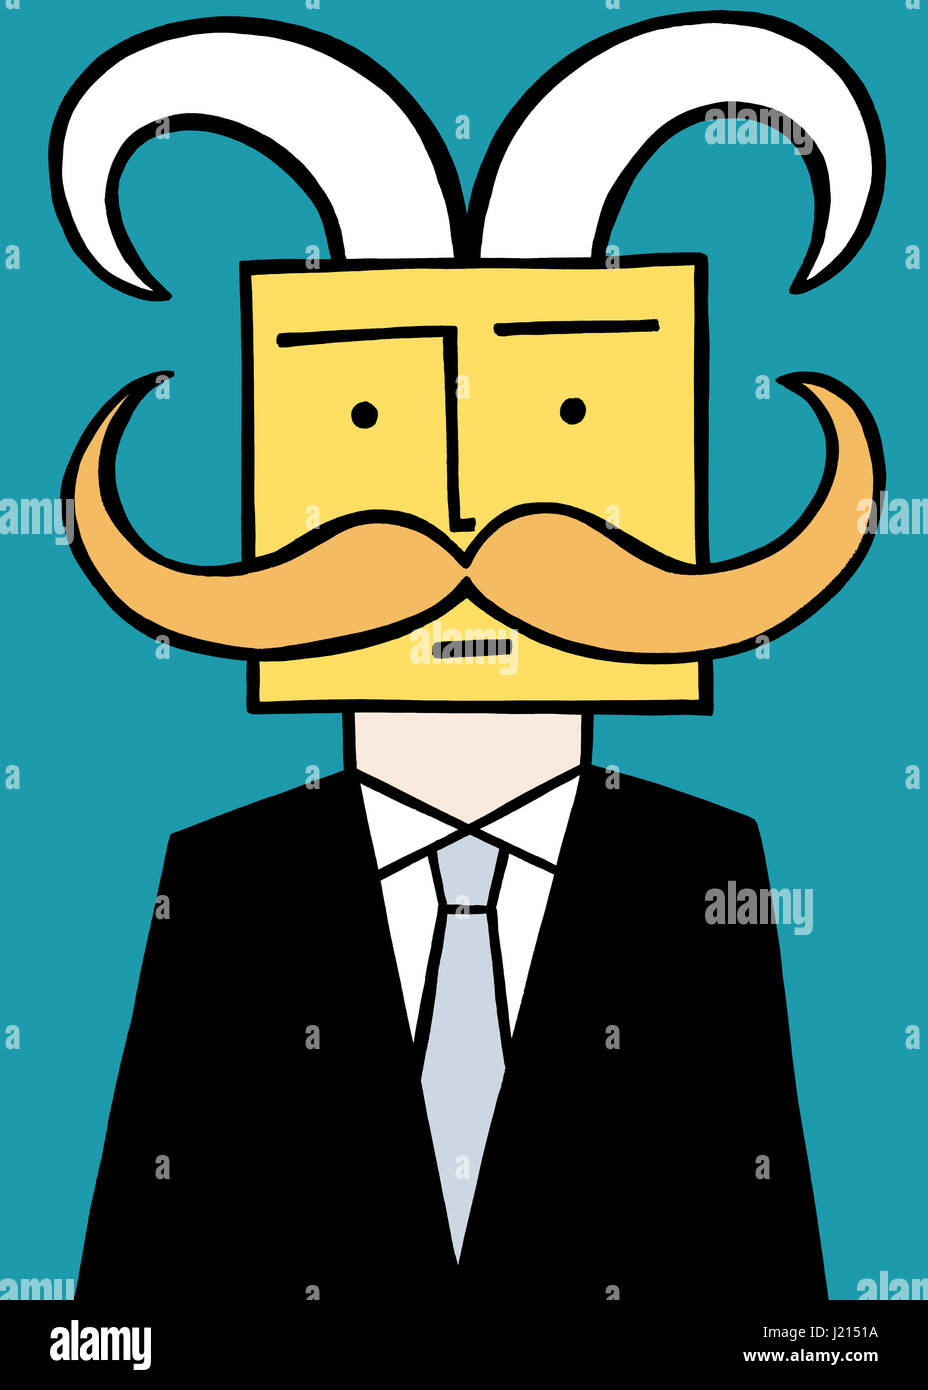 This may not be my face. A business illustration about thinking different thoughts. Stock Photo